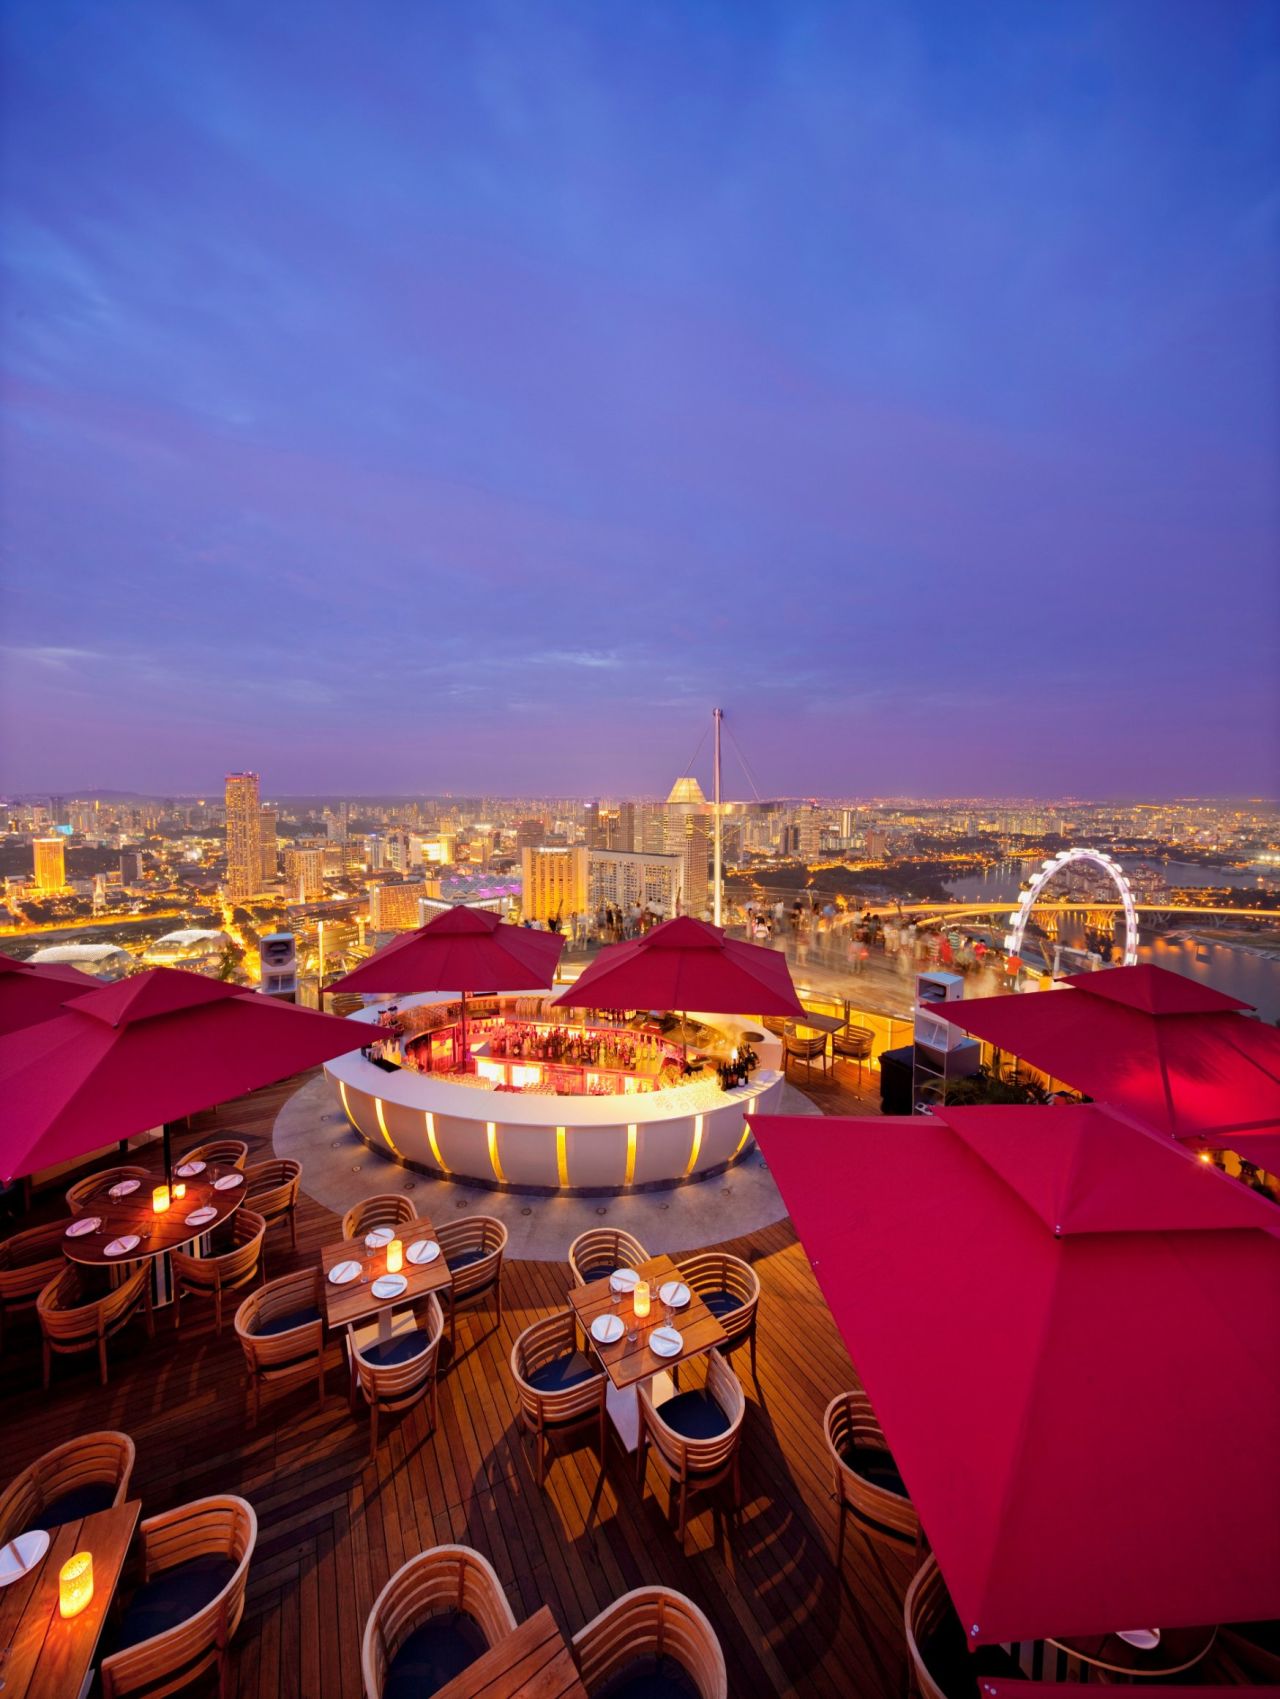 Singapore's Sky Bar at KU DE TA has spectacular views into the city and of Marina Bay Sands' famous infinity pool. Arrive at sunset to reap the full experience. 